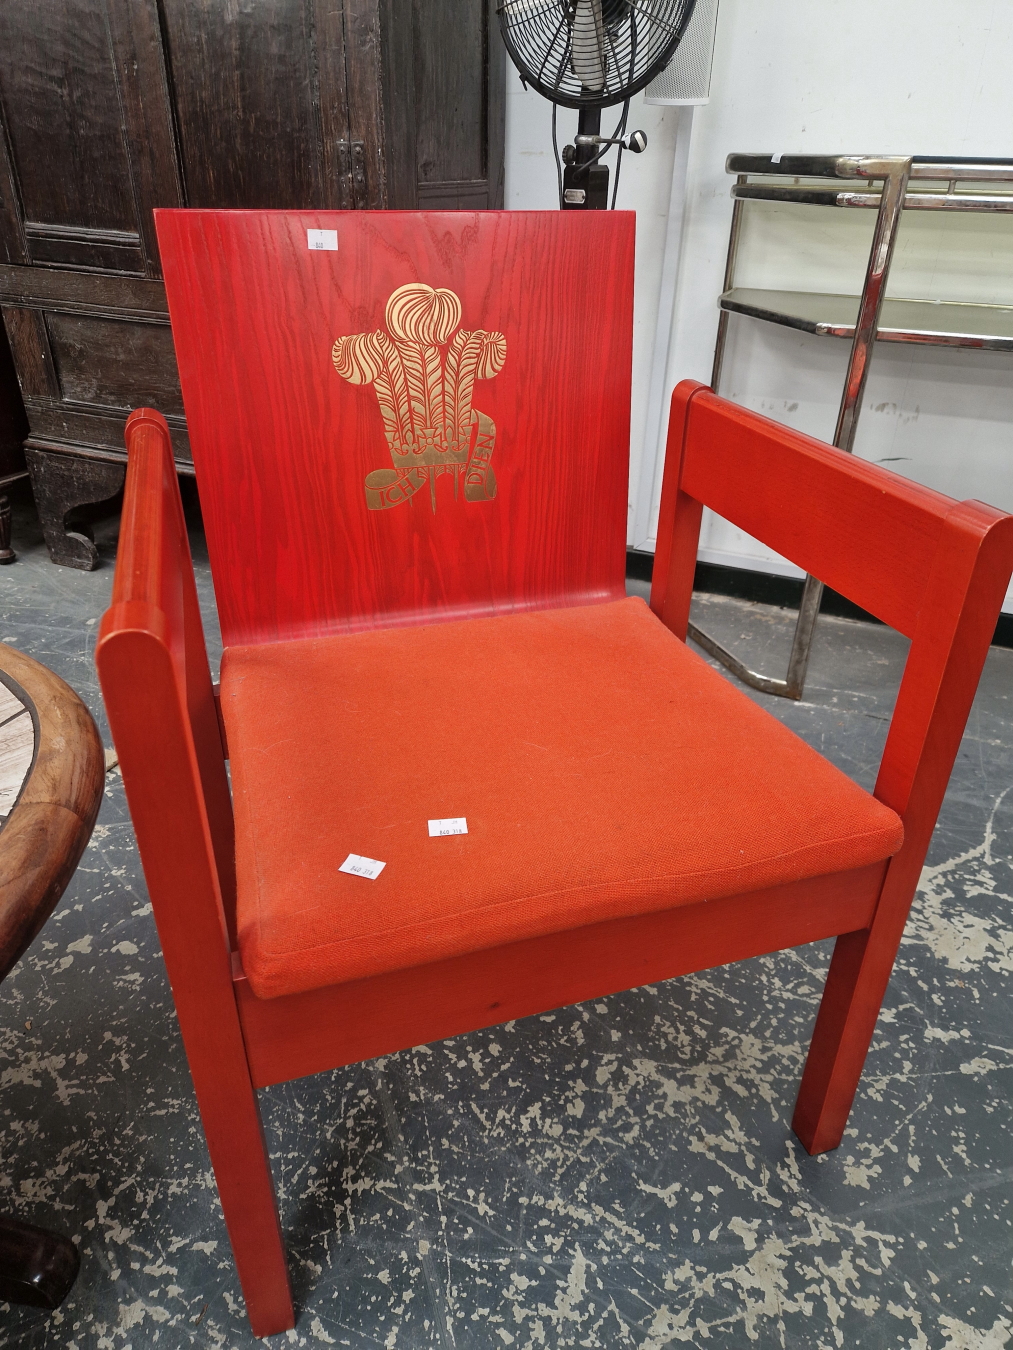 A 1969 PRINCE OF WALES INVESTITURE CHAIR